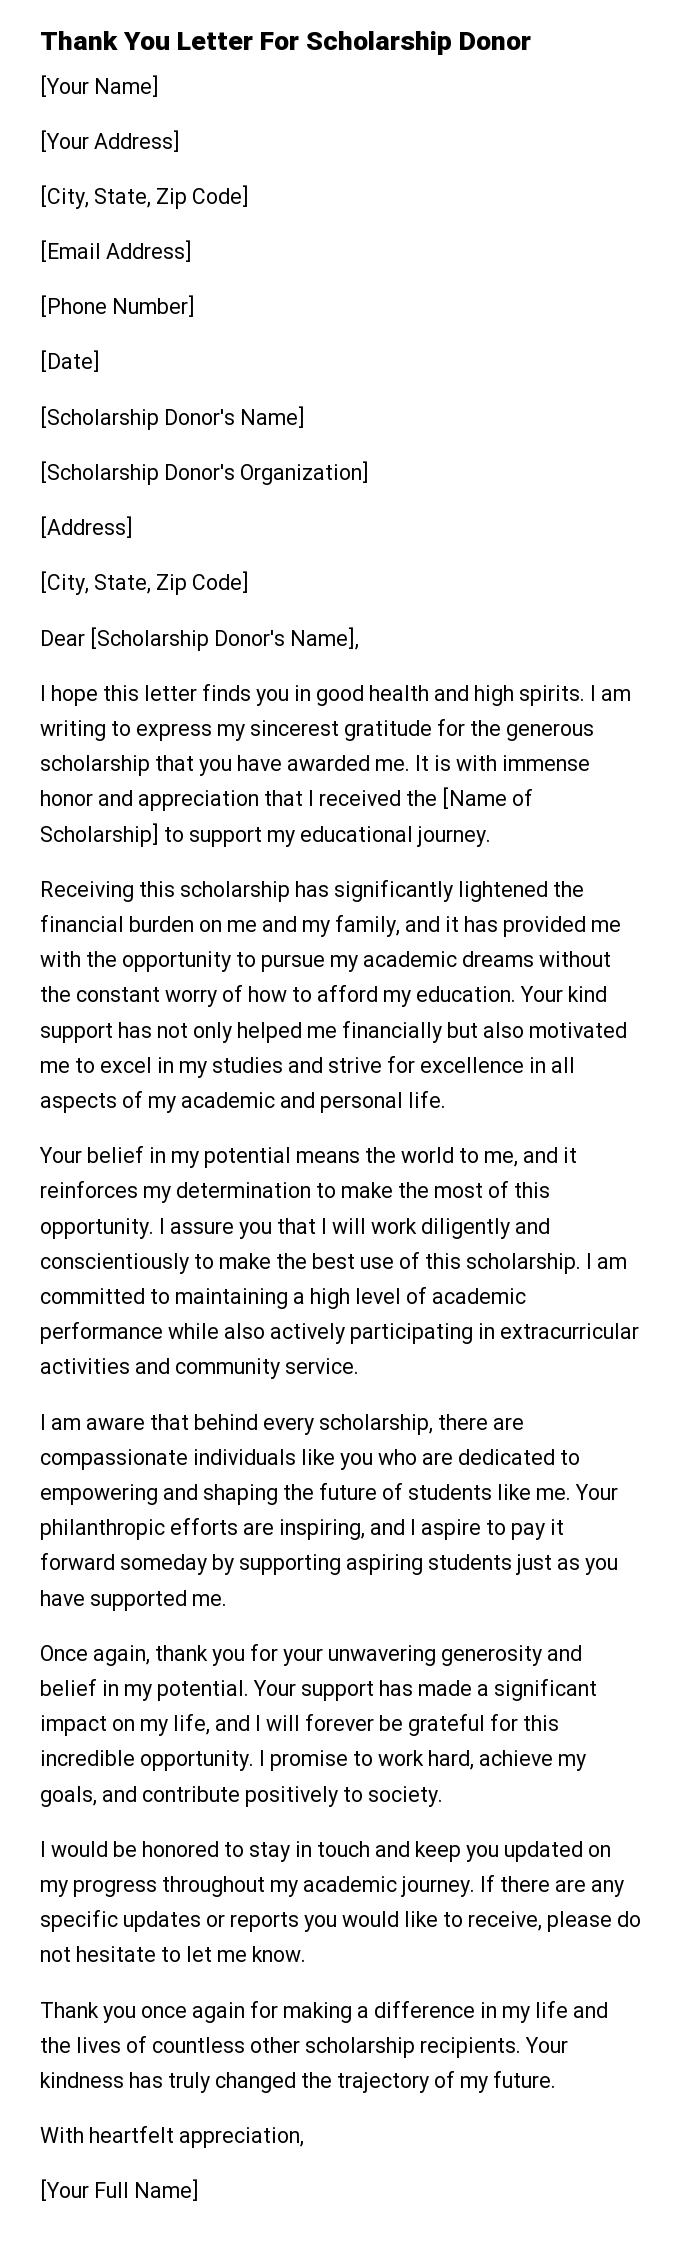 Thank You Letter For Scholarship Donor